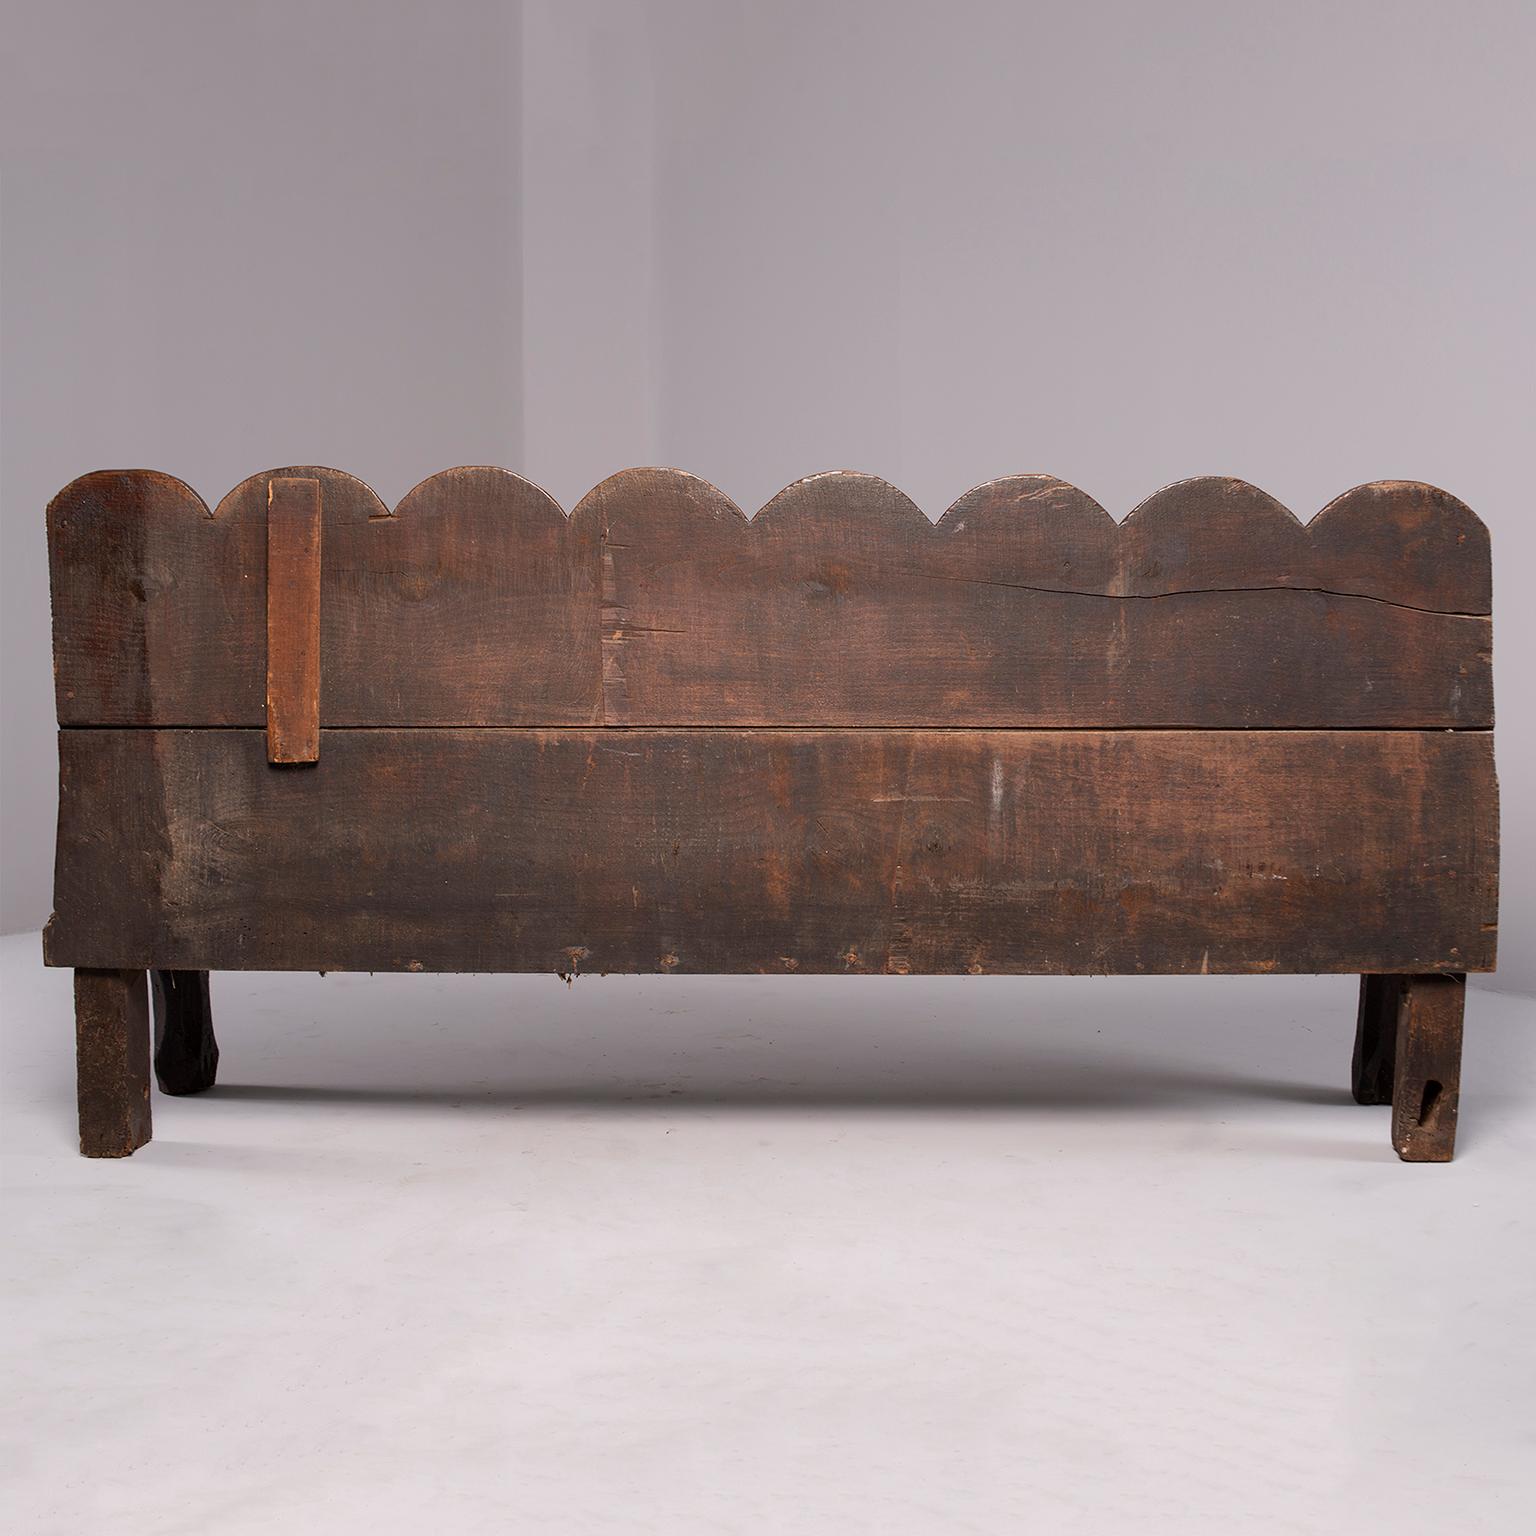 Hand-carved rustic Dutch chestnut bench has scallop edge detail on back rest, circa 1760s. Wood shows wear and patina and bench is structurally sound. Arms are 26” high and seat is 14.75” high and 19.25” deep.